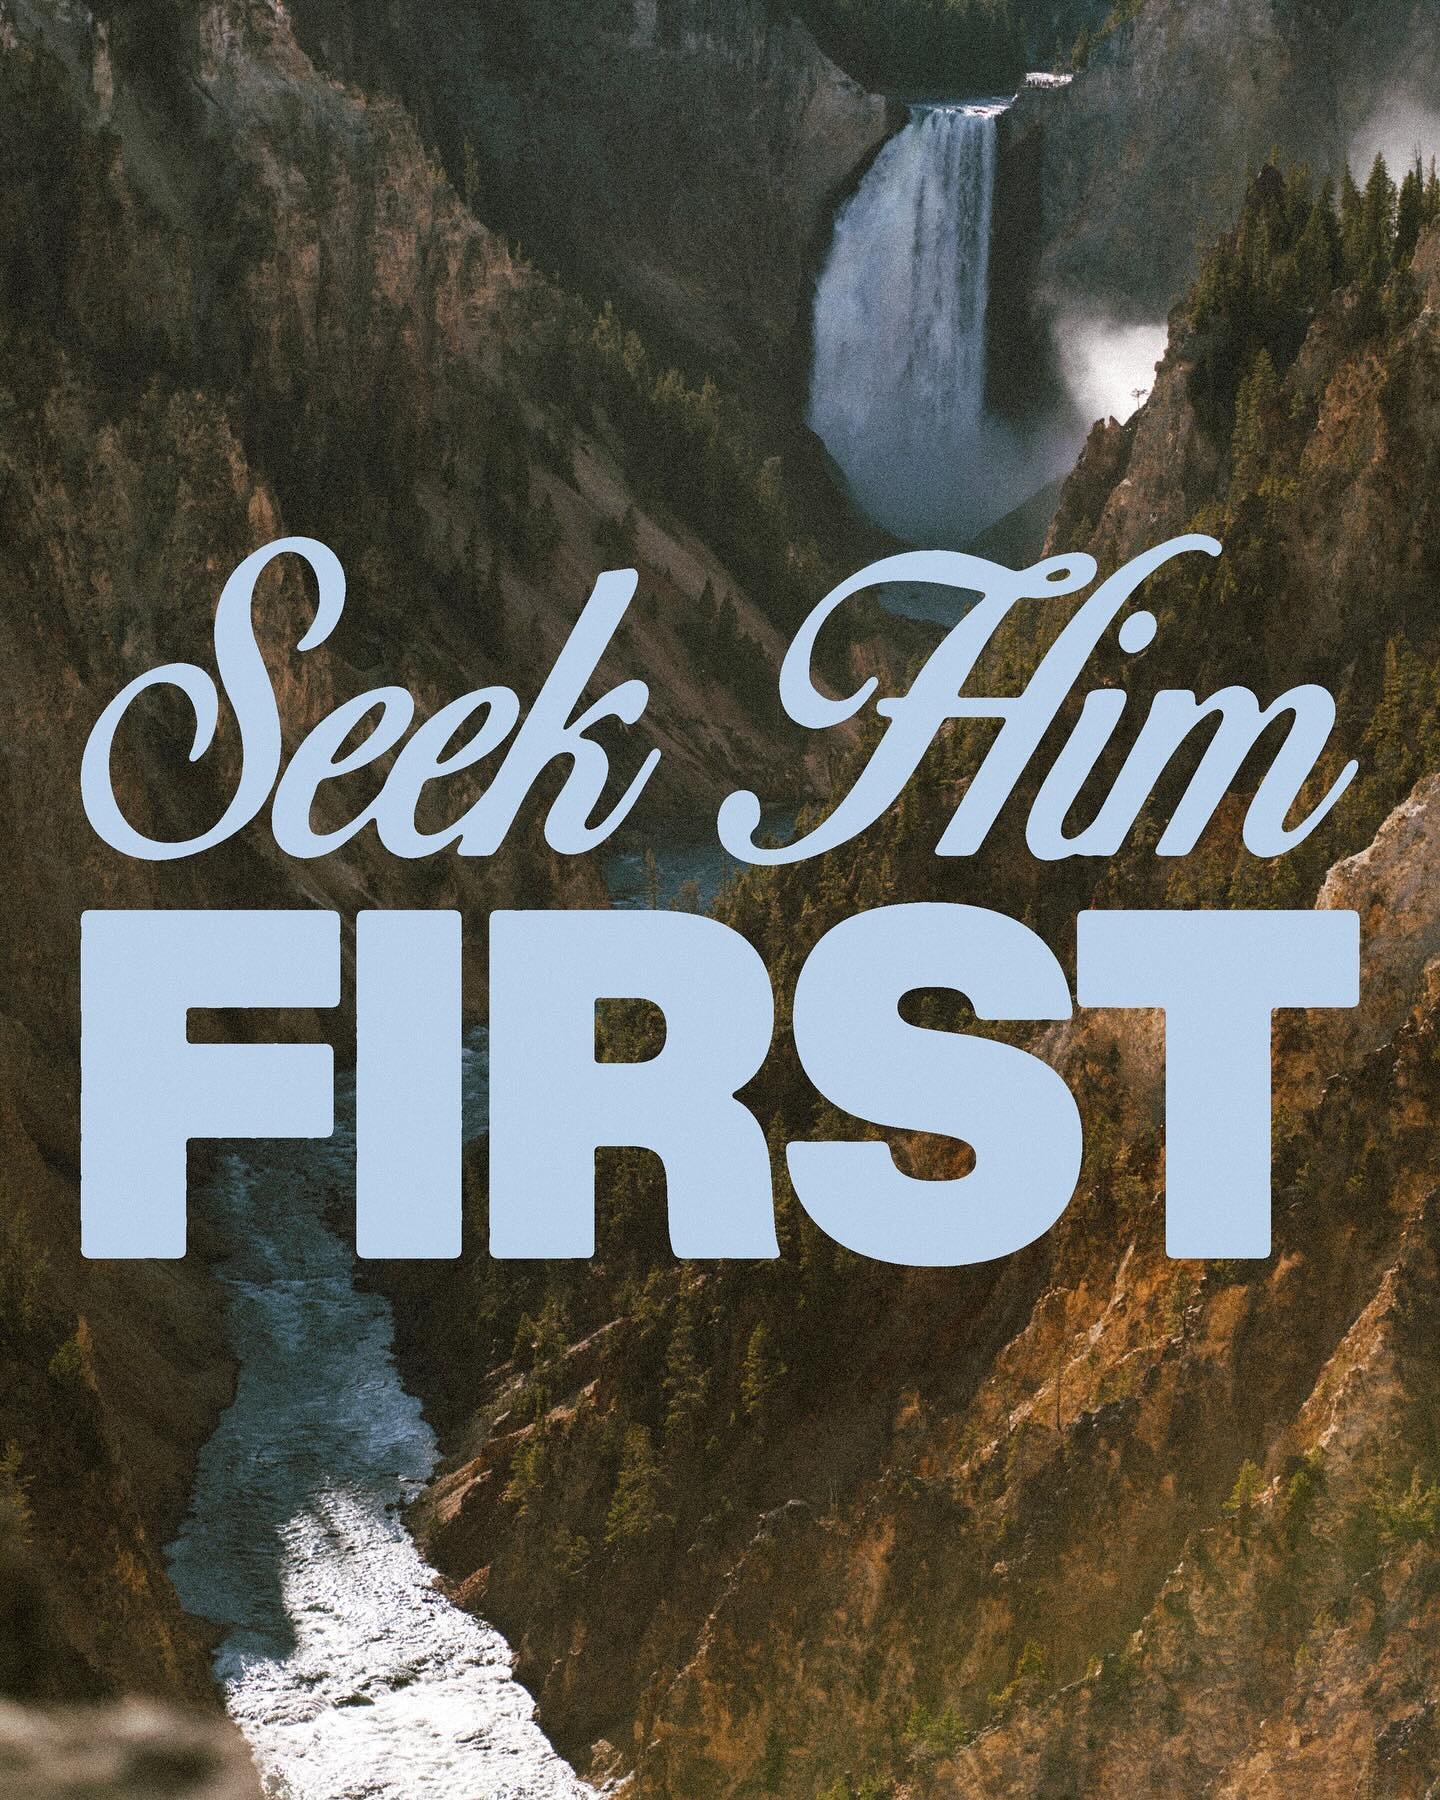 When you have questions, seek Him first! It doesn&rsquo;t matter how big or small your struggle may be, God cares and He wants to be  involved in your life 🙏
&bull;
&ldquo;Look to the Lord and his strength; seek his face always.&rdquo; Psalm 105:4
&